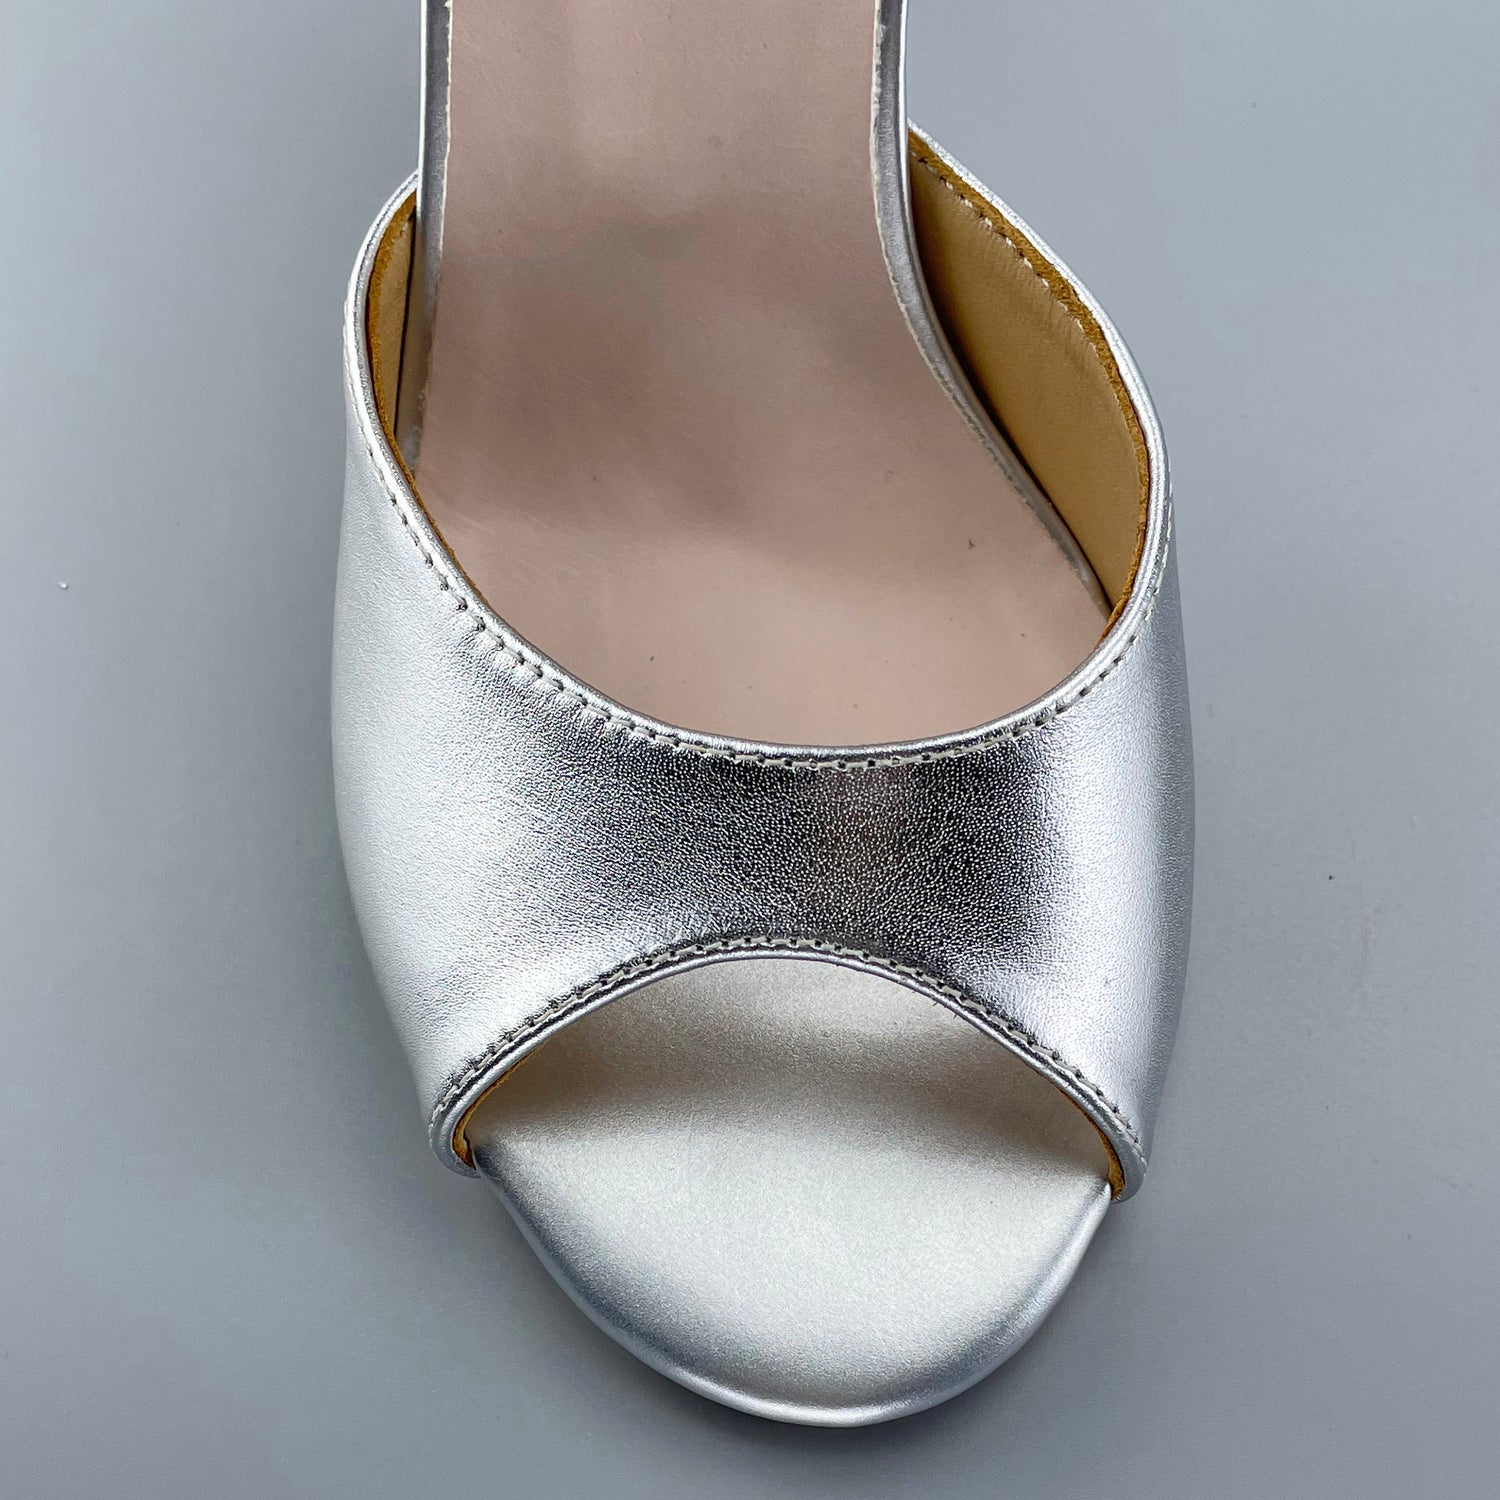 Pro Dancer Tango Shoes silver open-toe salsa heels with leather sole1